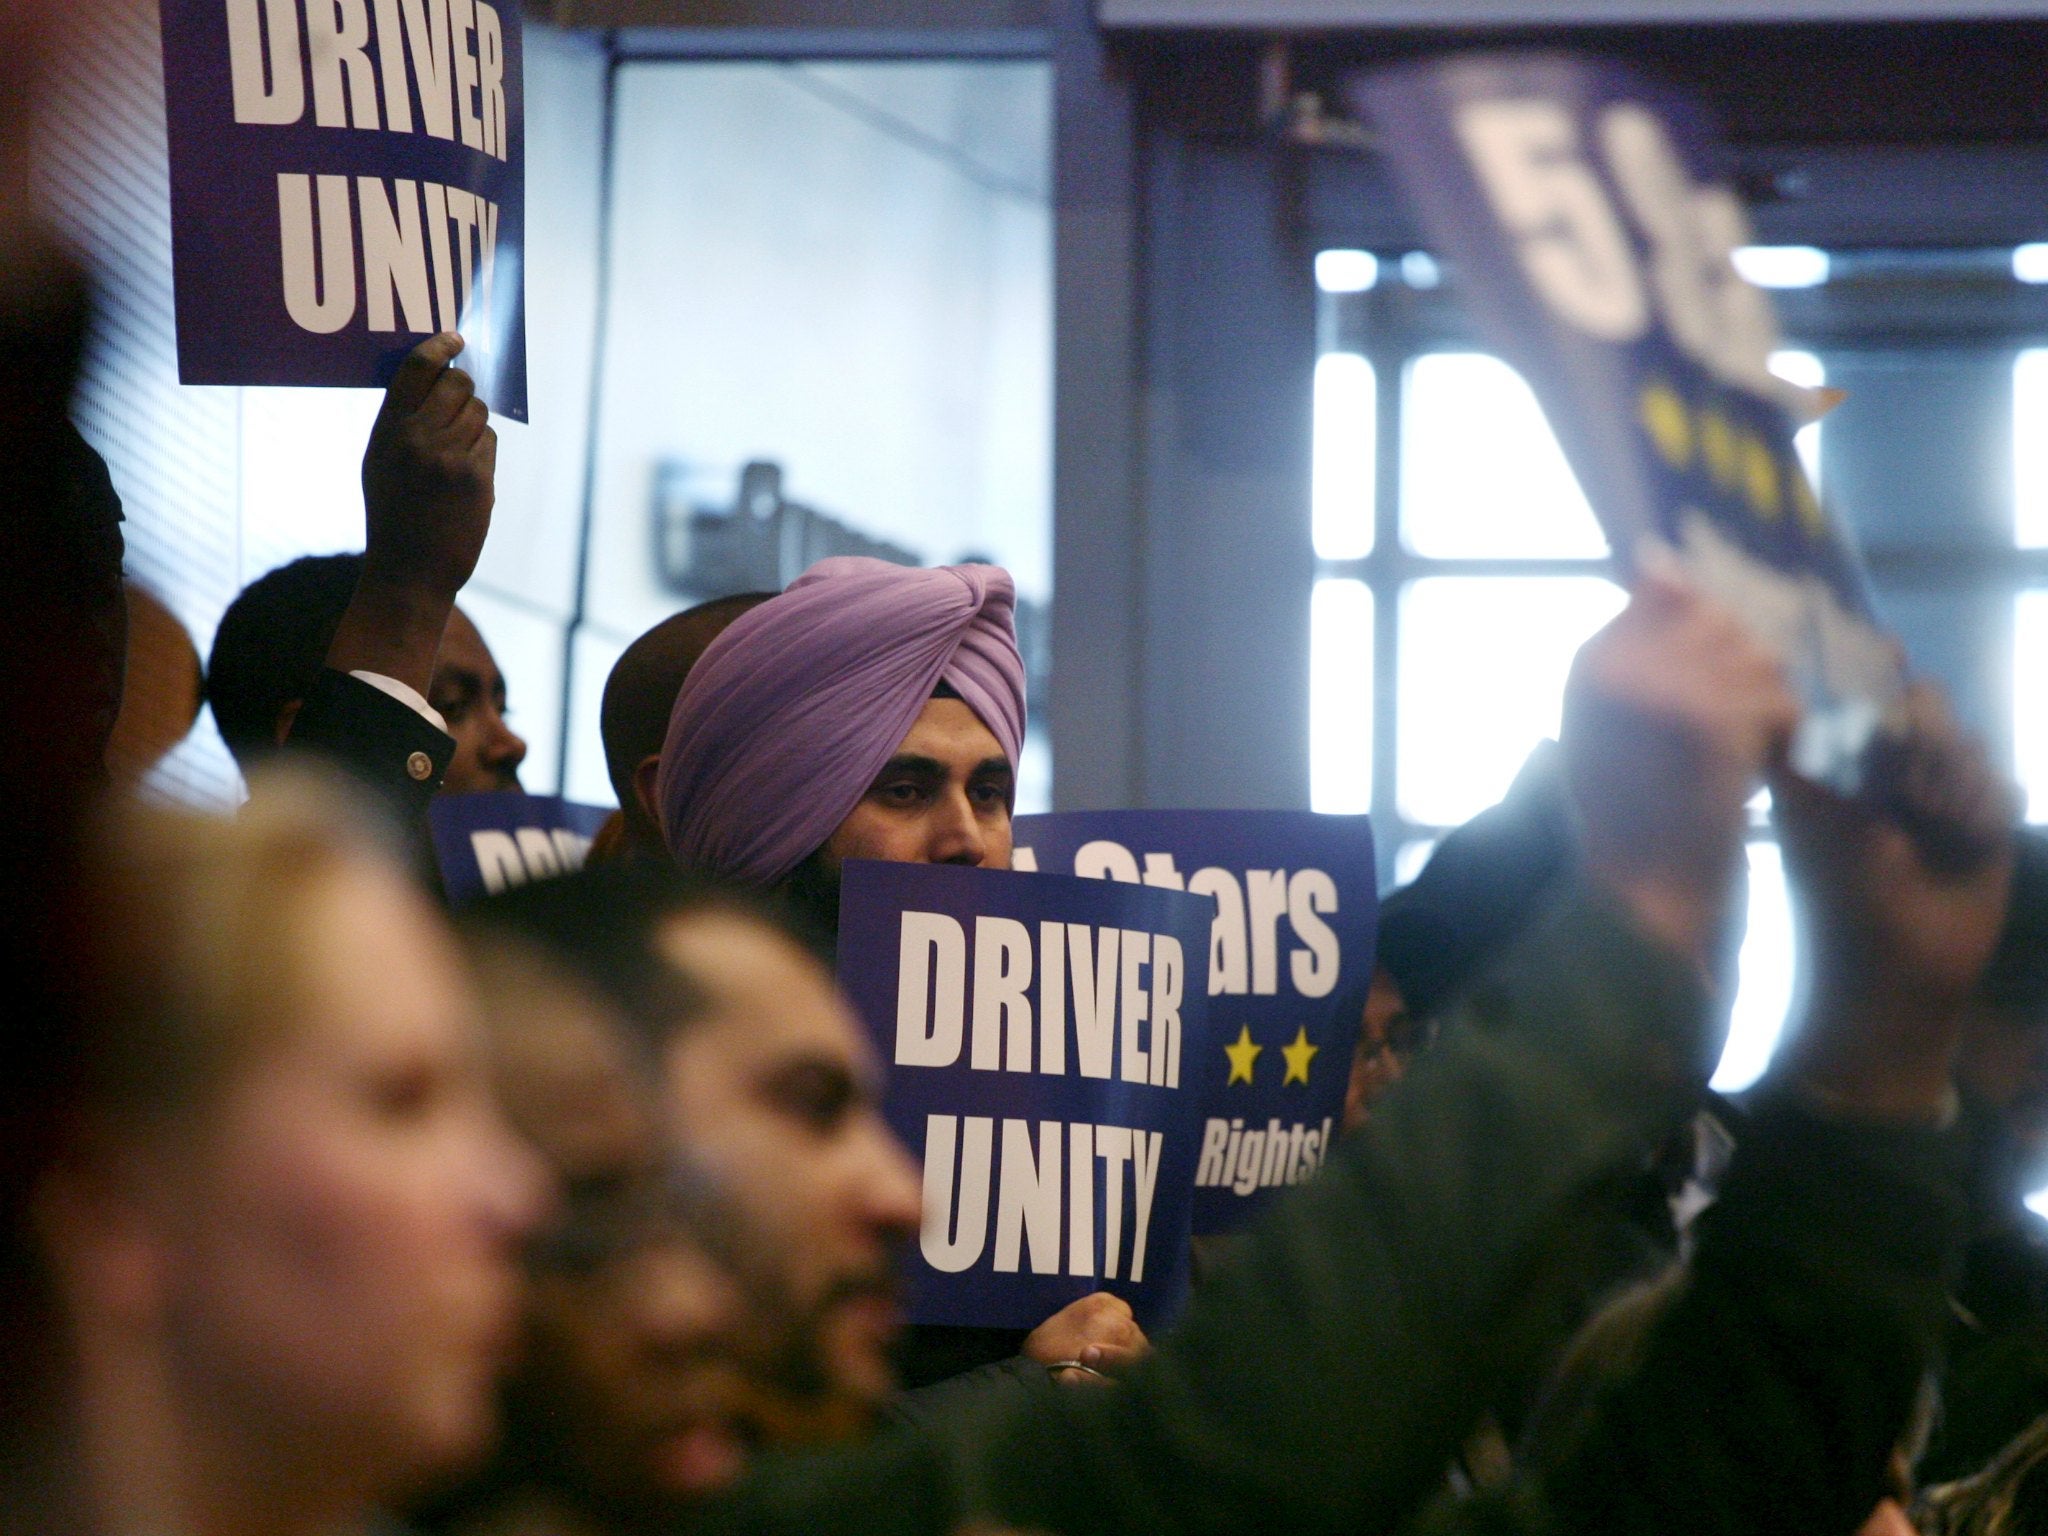 Backers of a Seattle ordinance allowing ride-for-hire drivers to unionize cheer as the City Council votes in favor on Dec. 15, 2015